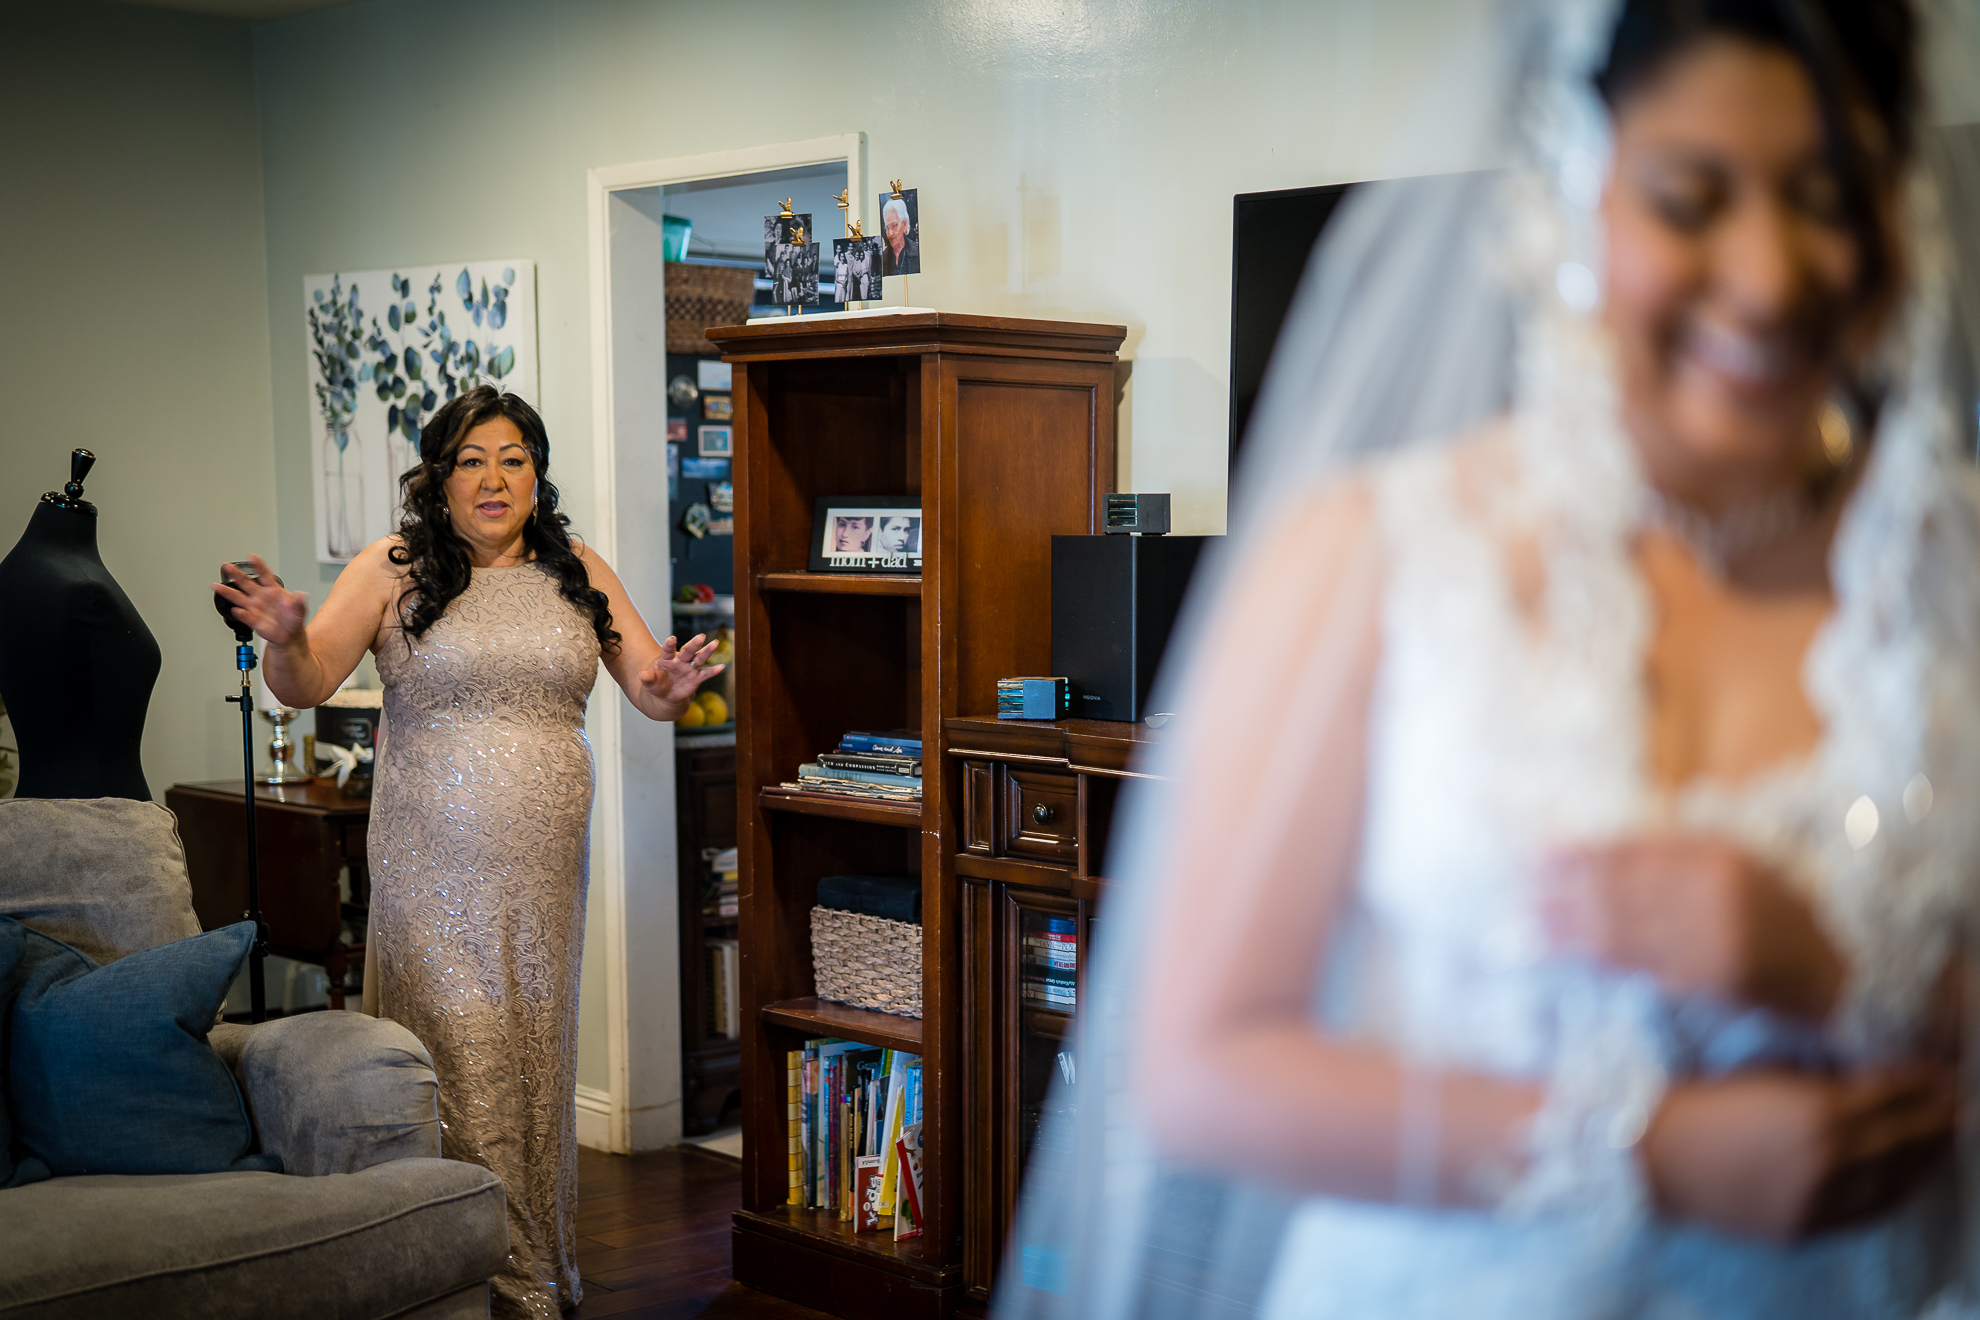 ThomasKim_photography A bride is getting ready in a stylish living room.